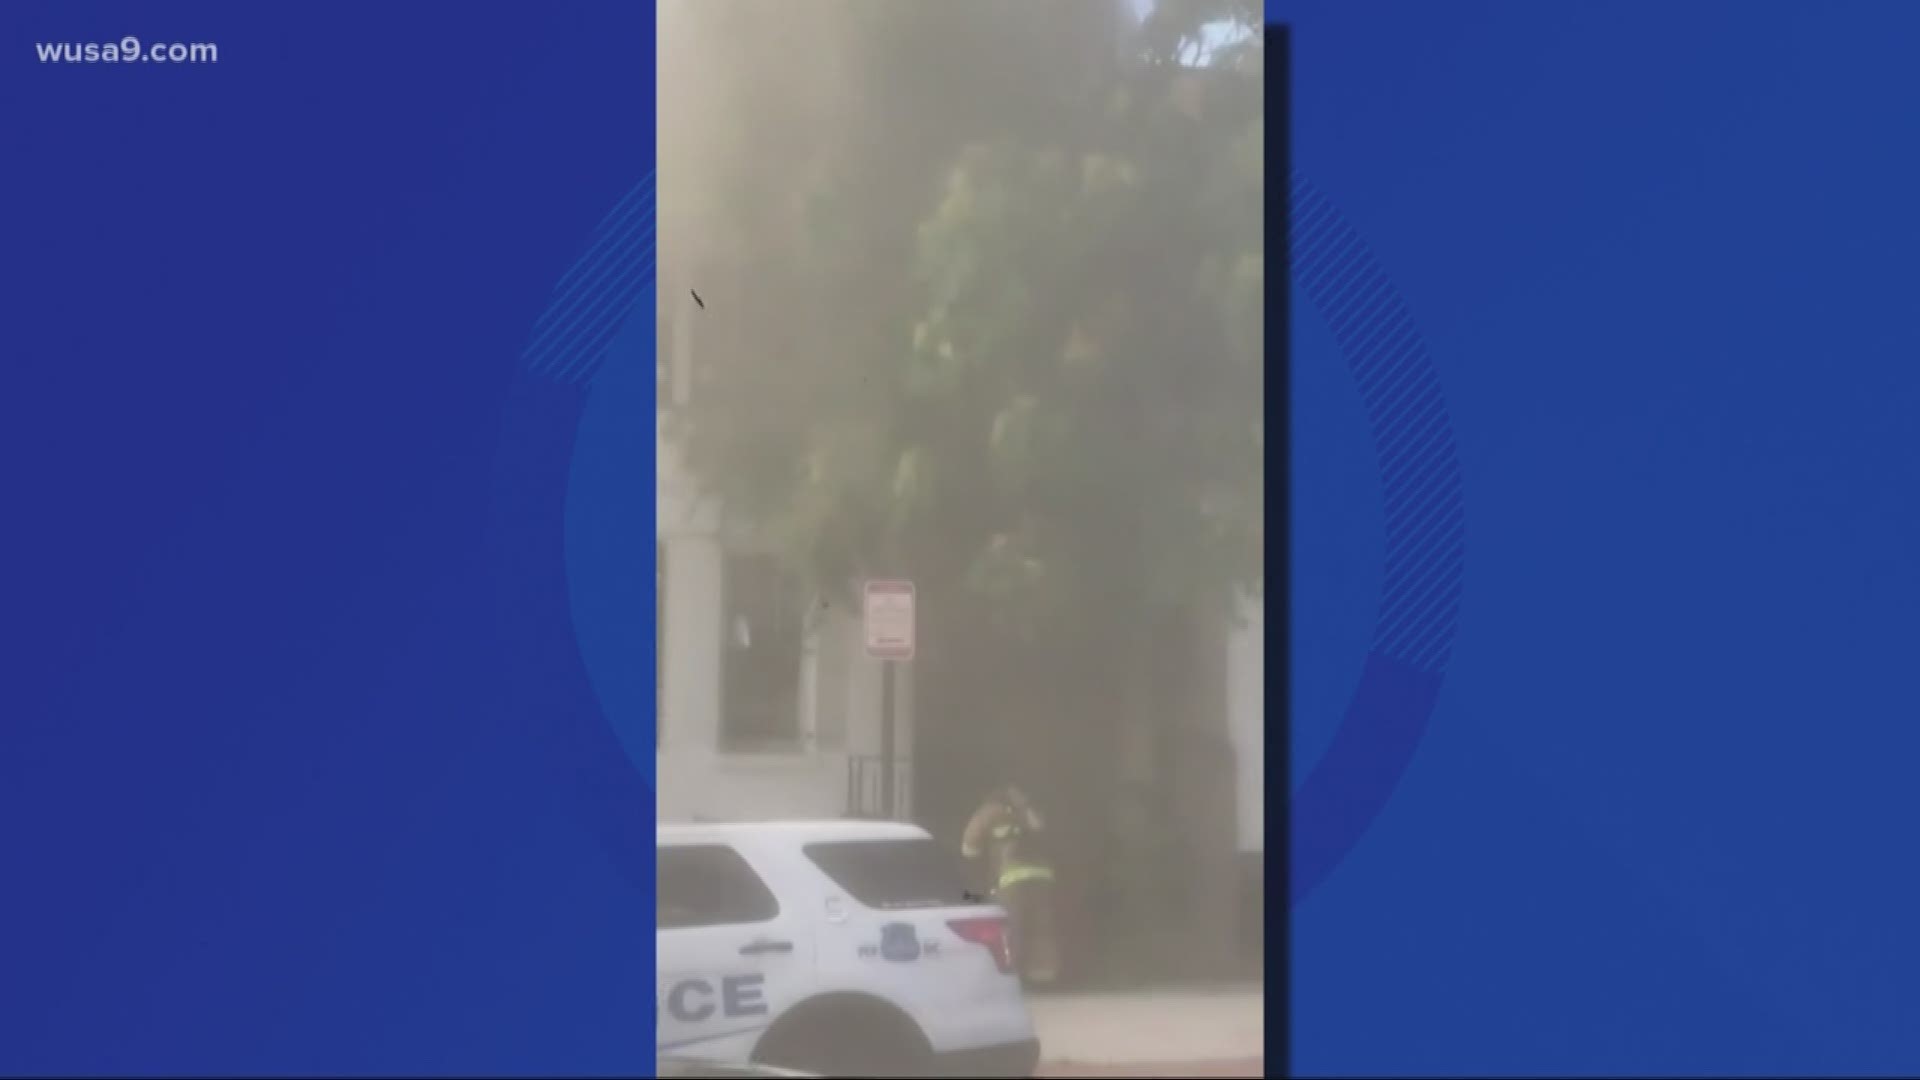 After a weekend house fire killed a 9-year-old boy, D.C. Mayor Muriel Bowser is referring the case for a criminal investigation, saying the property was an unlicensed rental.

The fire broke out in a two-story row house in the 700 block of Kennedy Street NW on Sunday morning. Fire crews battled the flames in the heat, and pulled out 9-year-old Yafety Solomon and a man, both of whom died from their injuries.